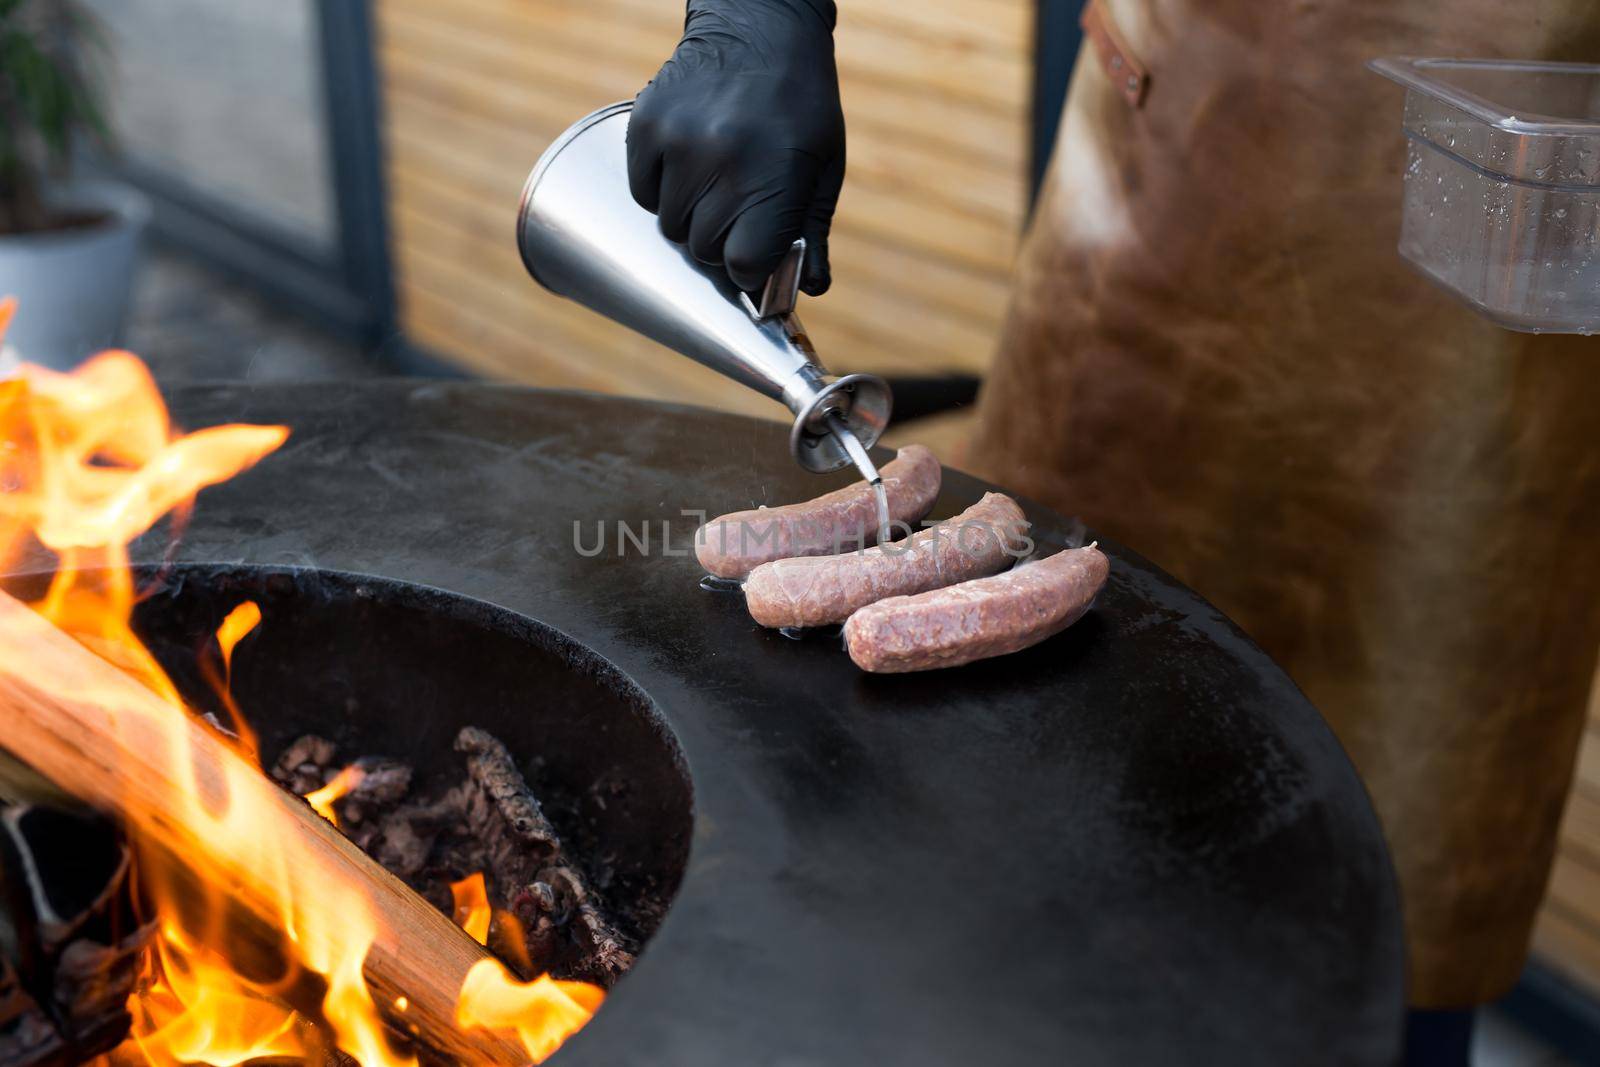 Sausage on Barbeque Smoker Grill. Hot and smoked sausage. Food Festival